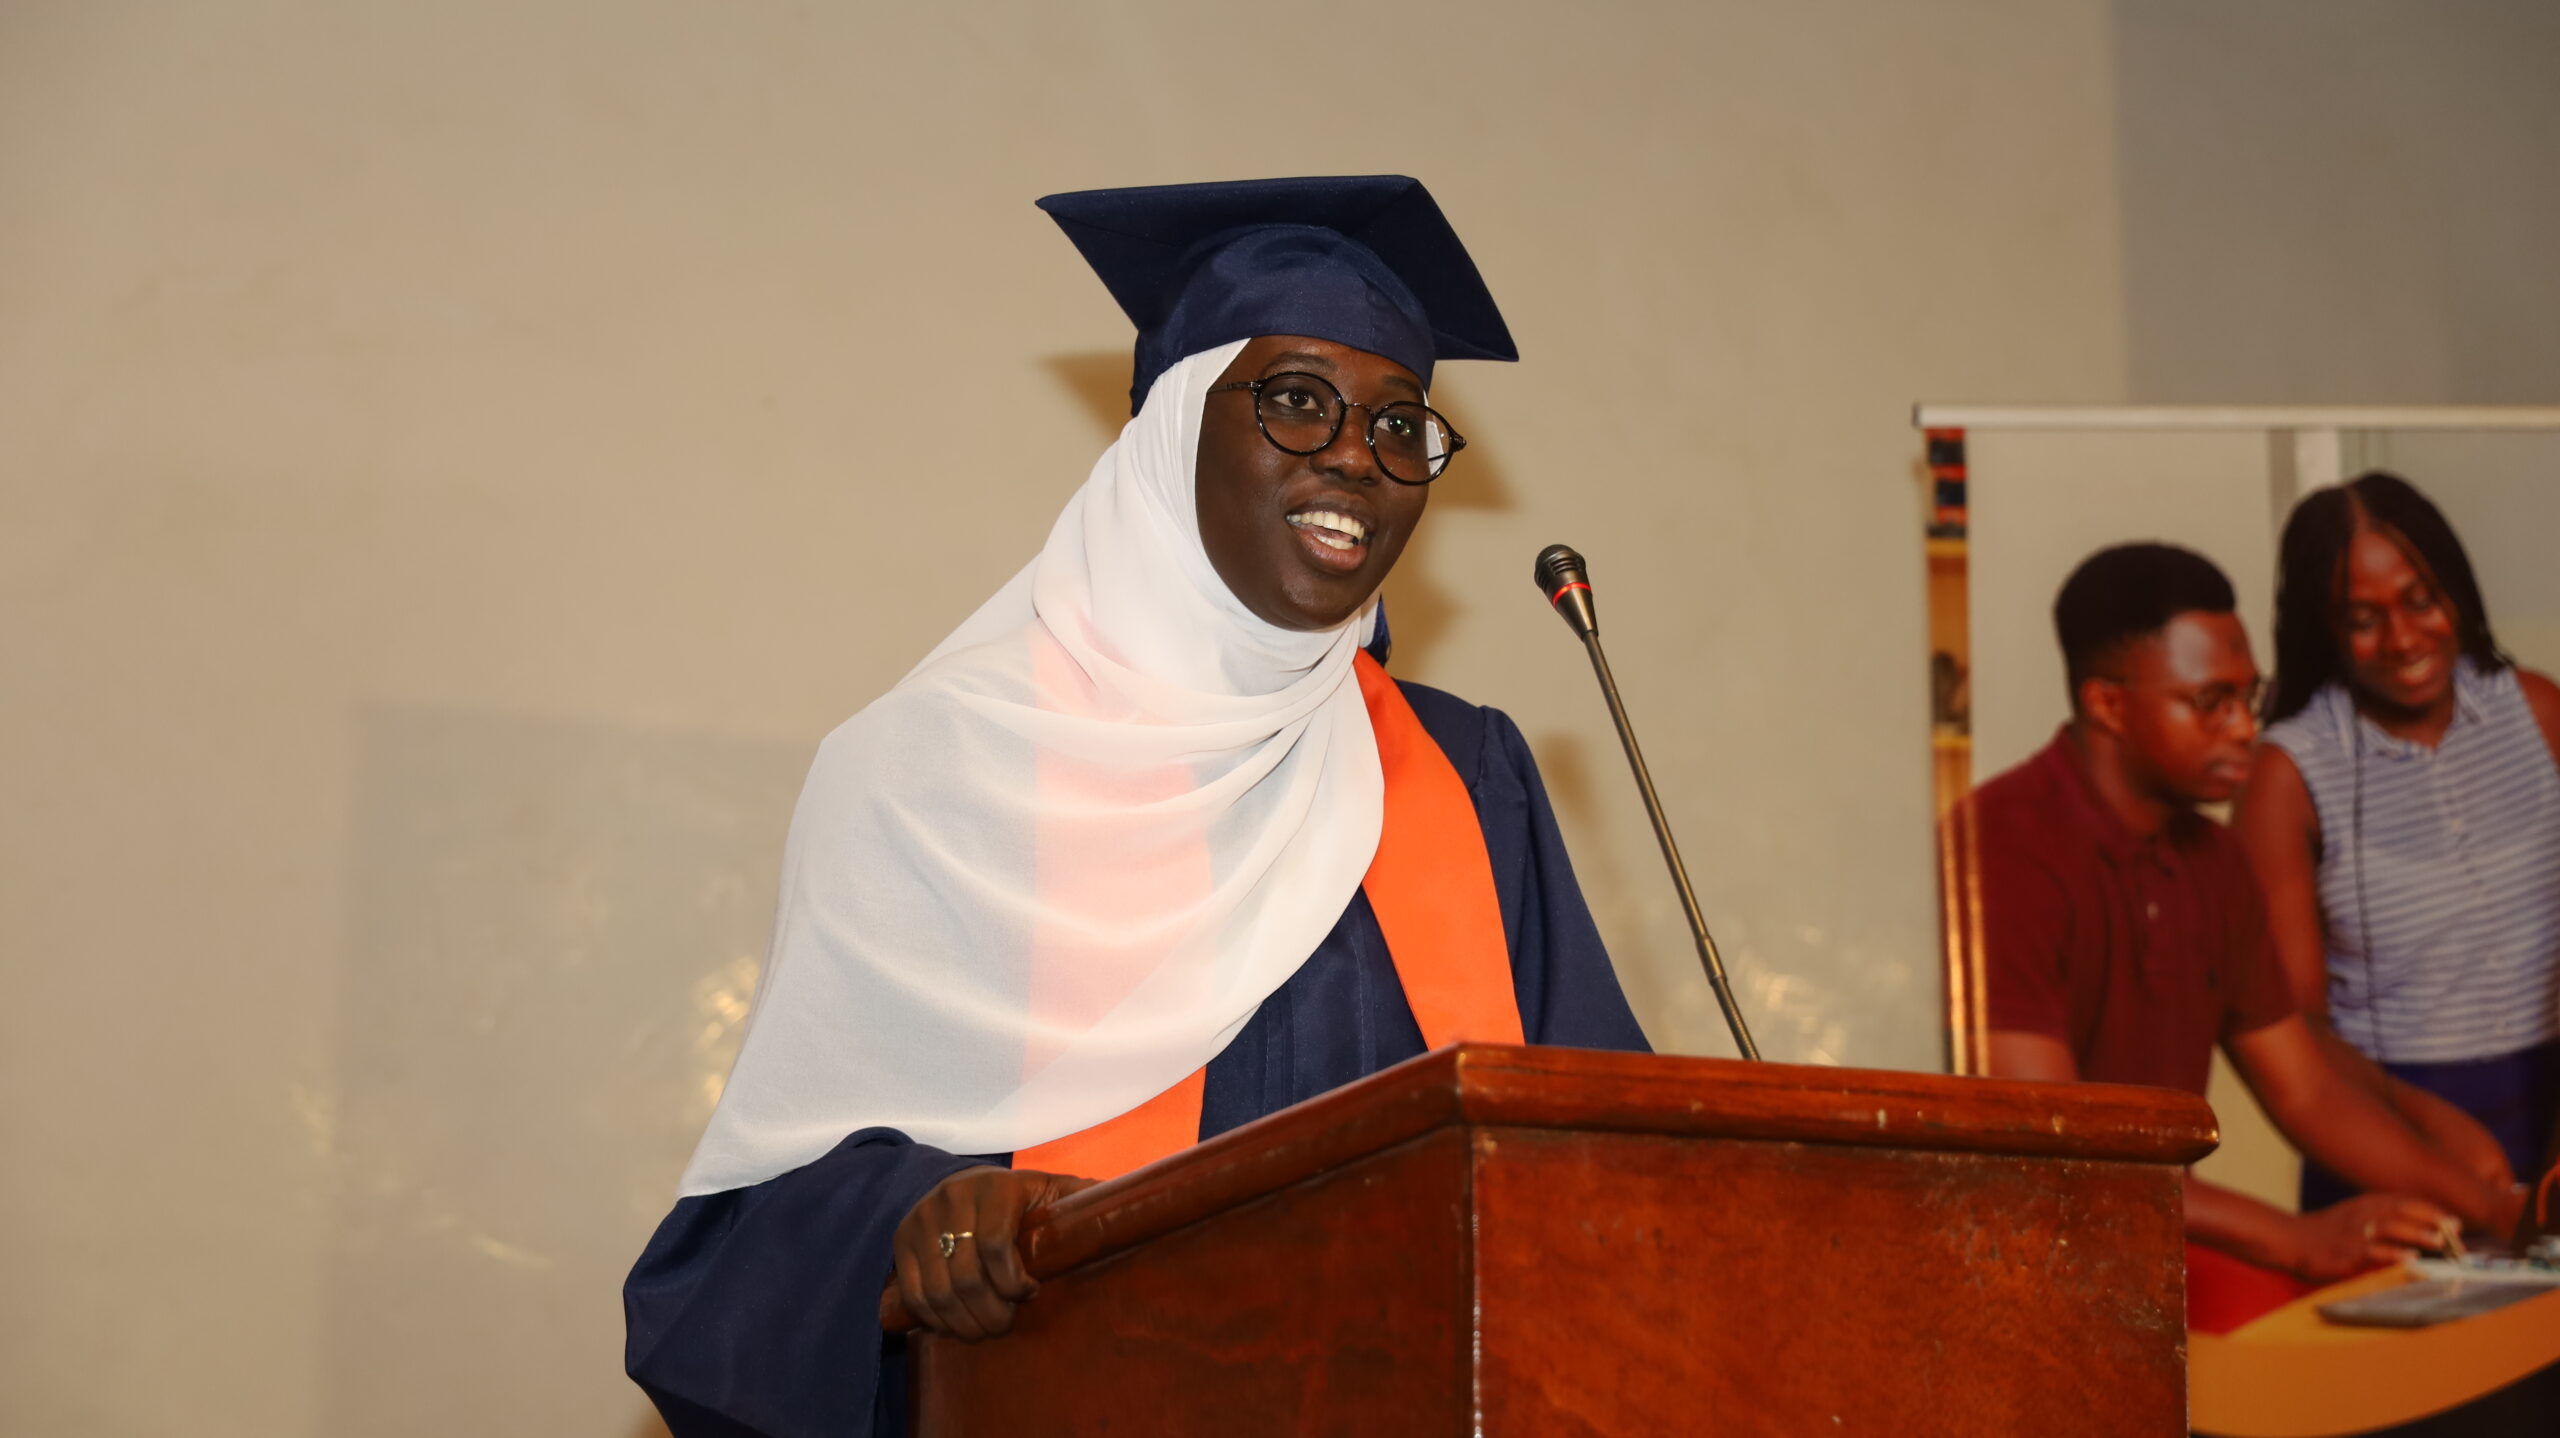 Heartening speech by our graduated student Nafissatou Niang